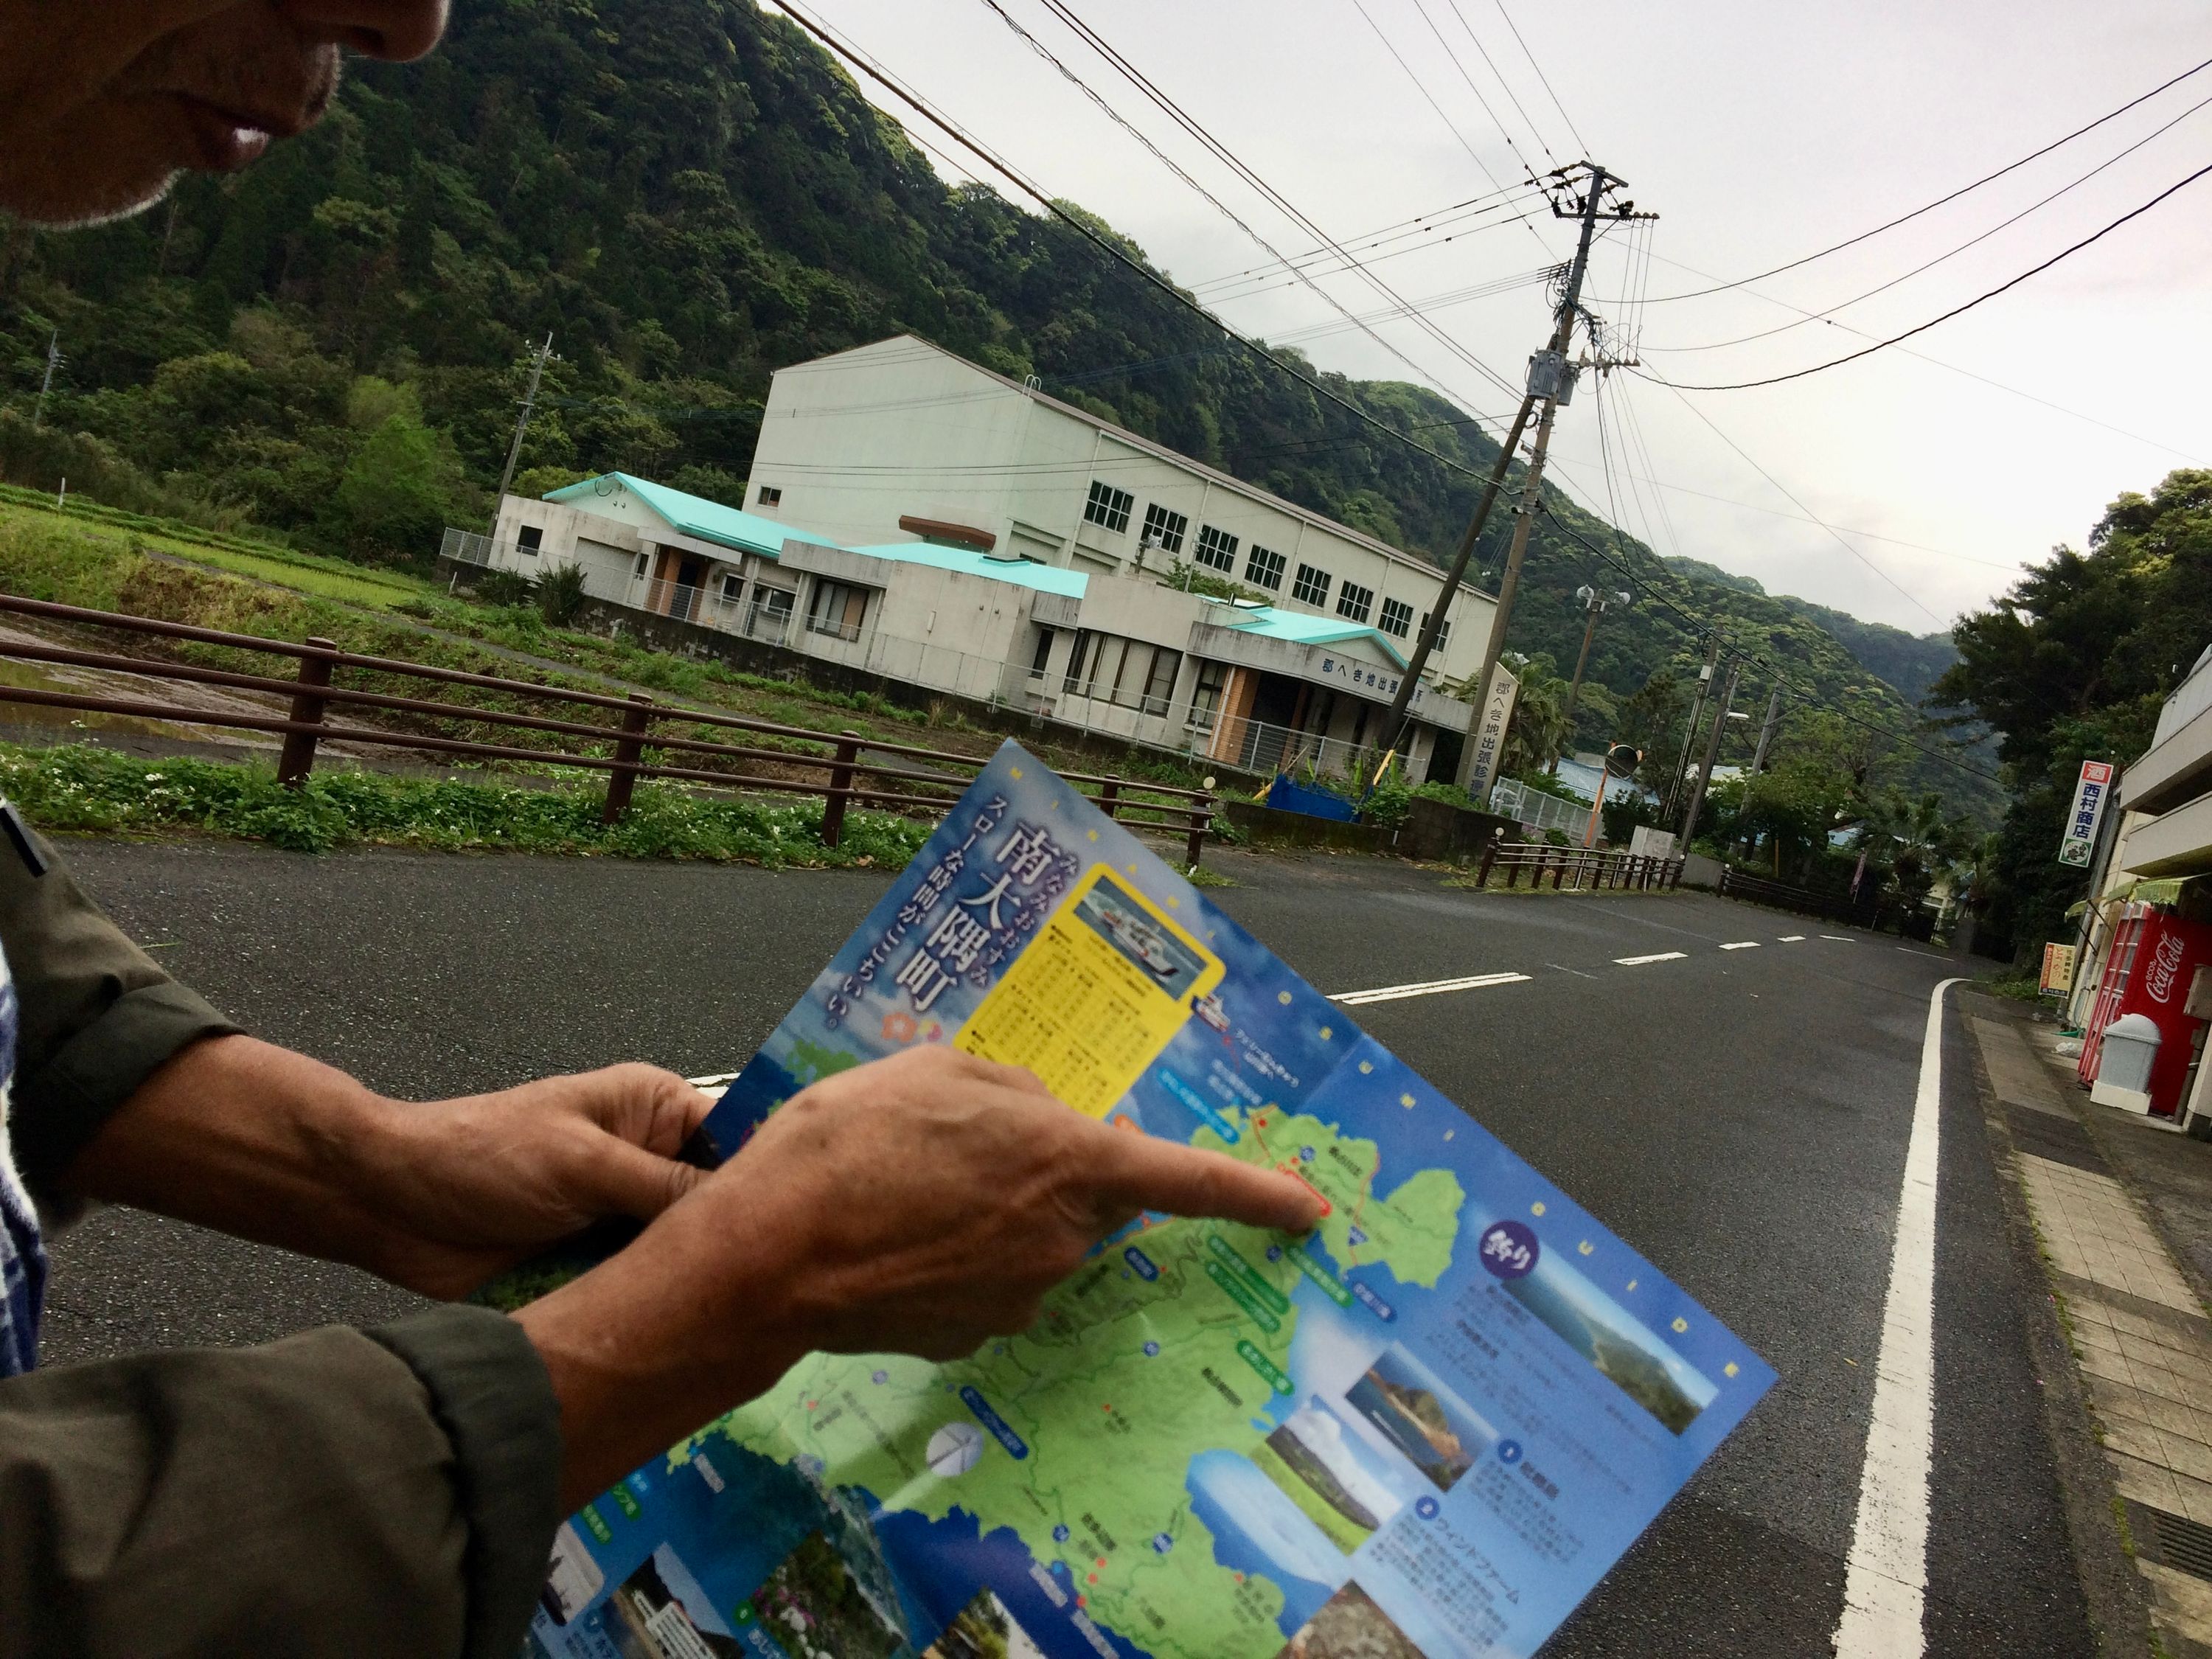 A man points at a tourist map of Minamiōsumi Town, whose outline looks like a jumping dog.